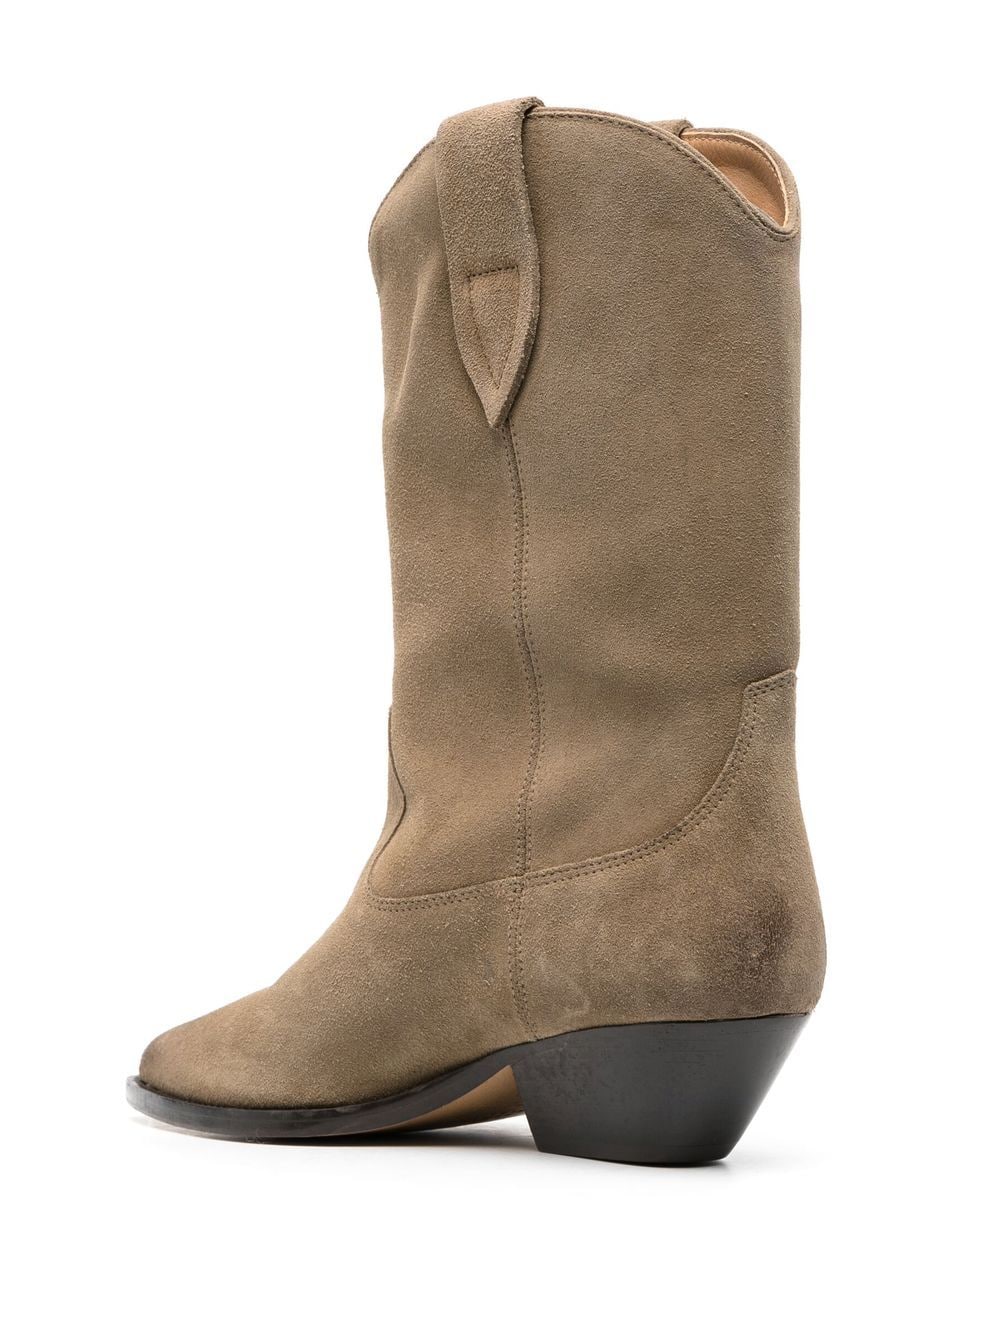 ISABEL MARANT Stylish TAUPE Leather Ankle Boots for Women